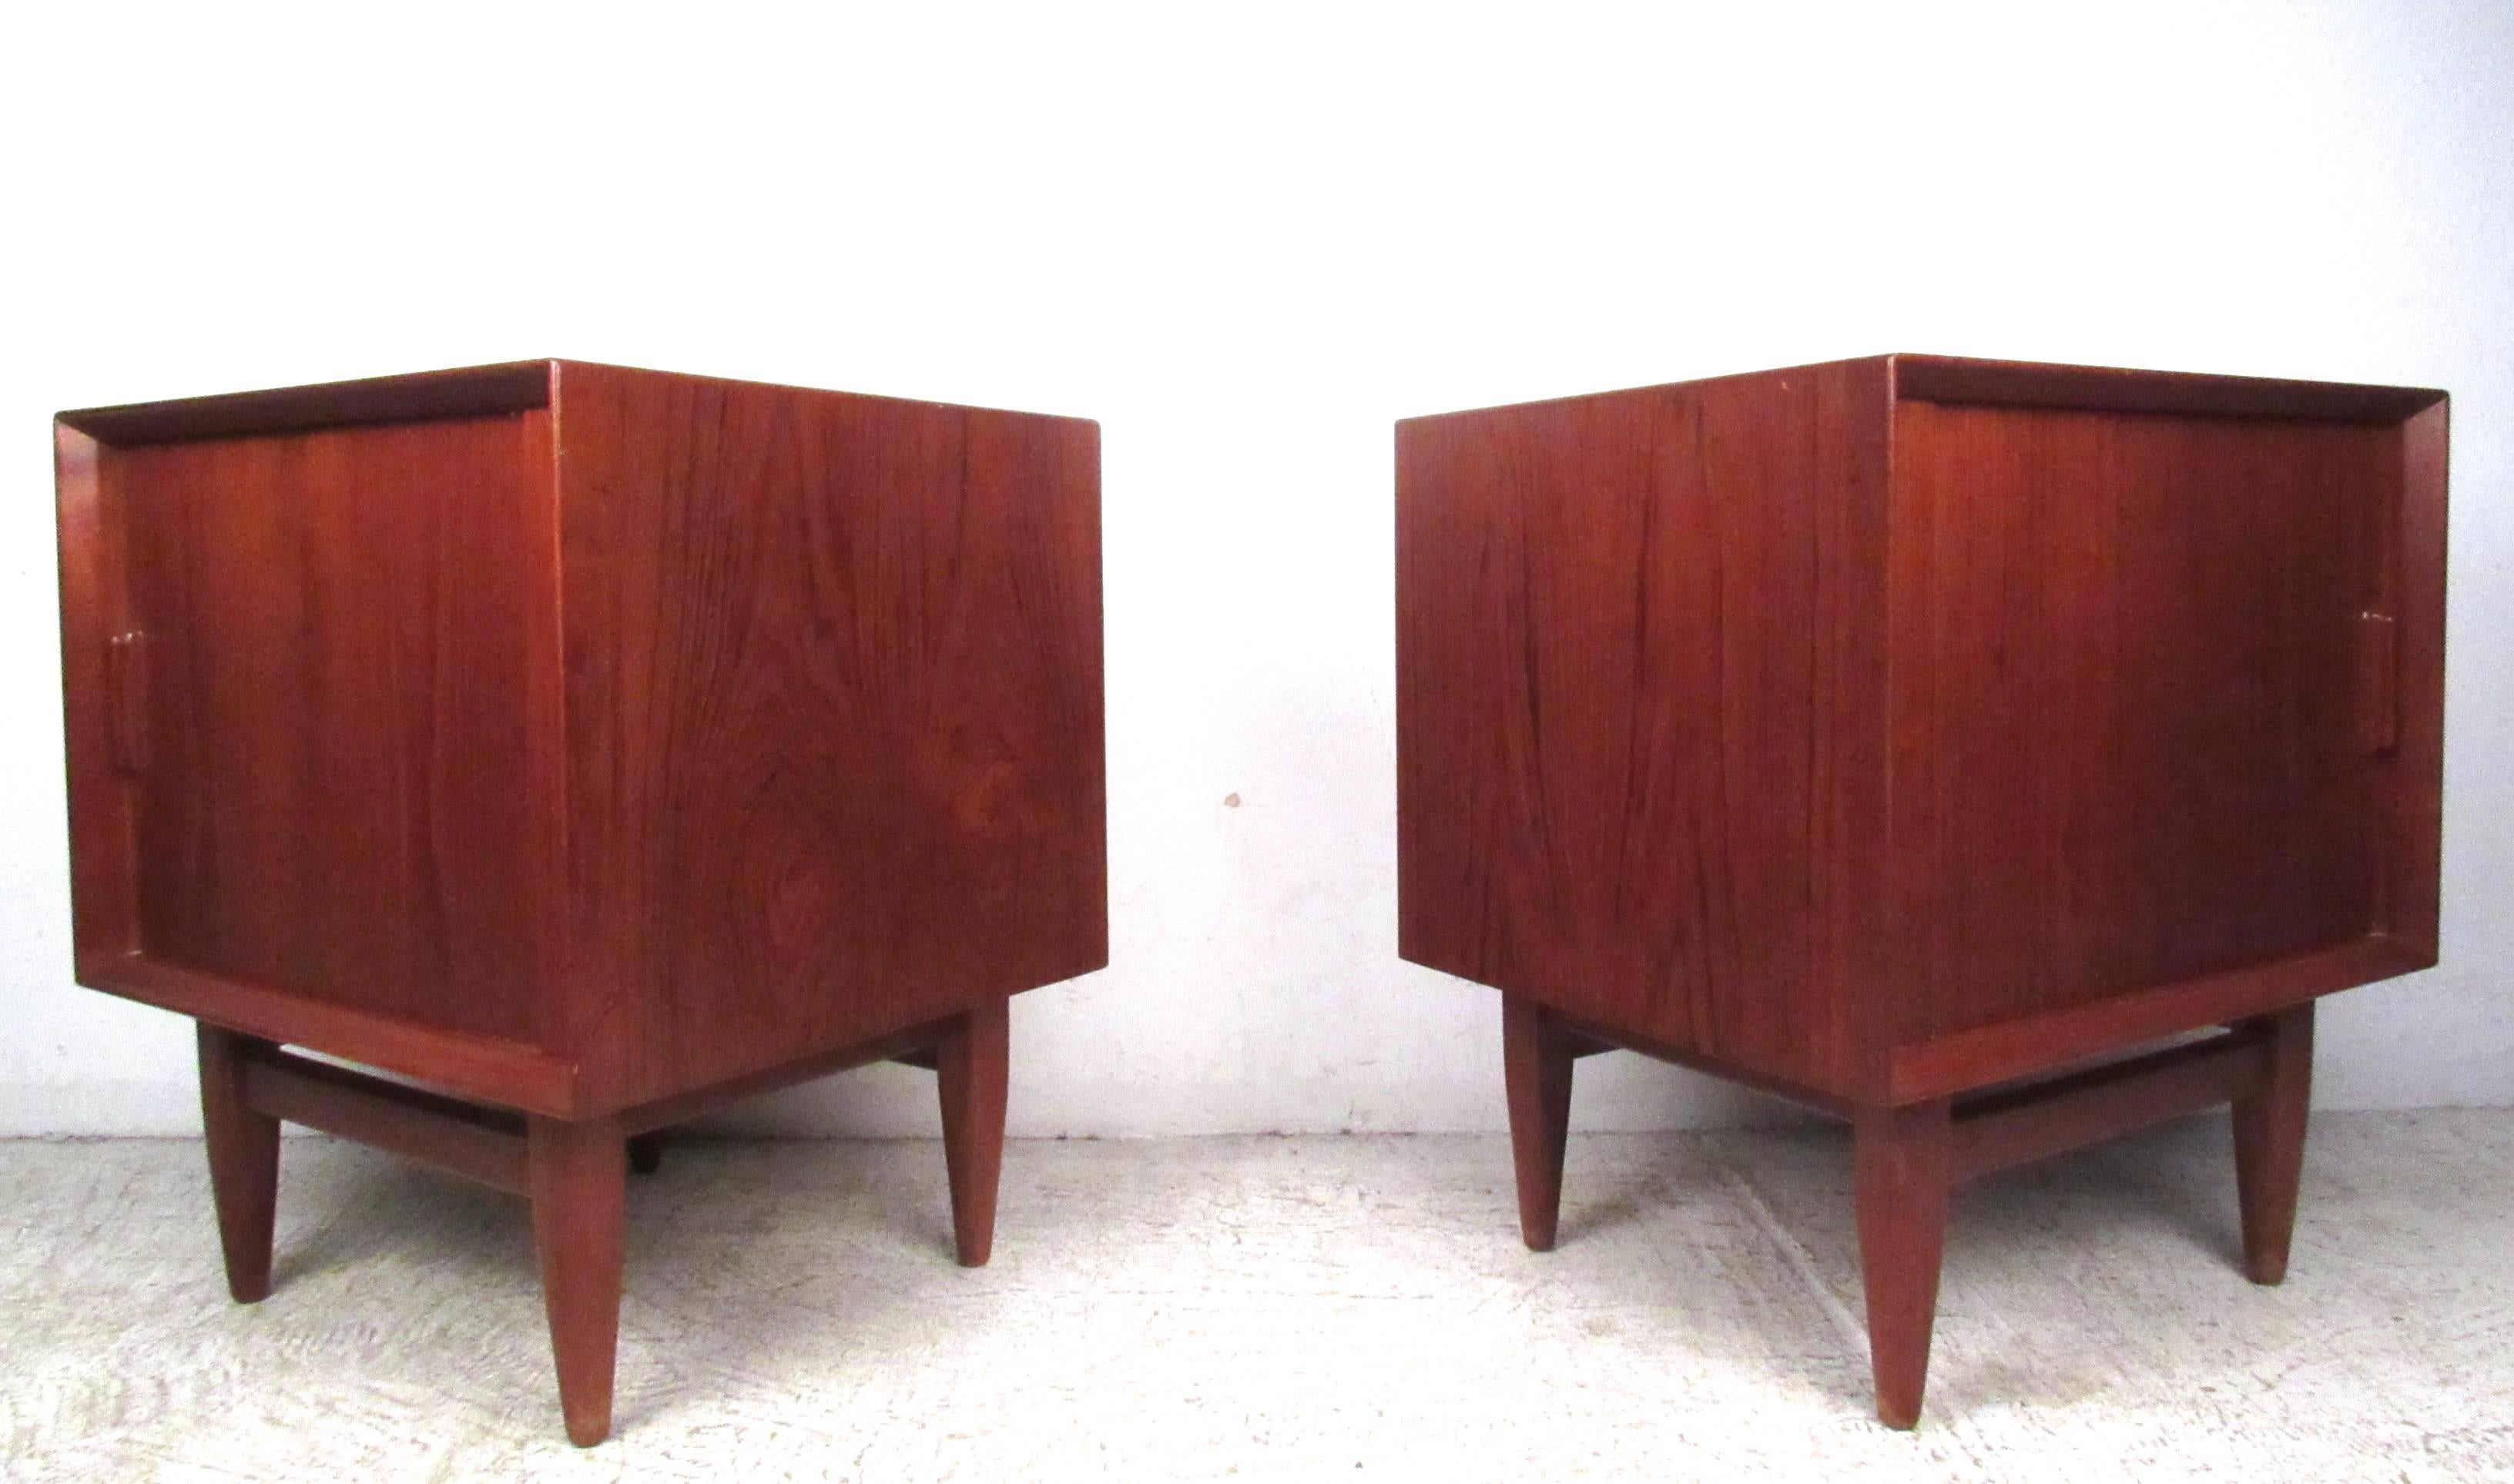 This pair of vintage Danish teak nightstands offers a great option for any interior, featuring tapered legs, tambour doors, and finished backs. Open cabinet space with top drawer make organization easy. Please confirm item location (NY or NJ).